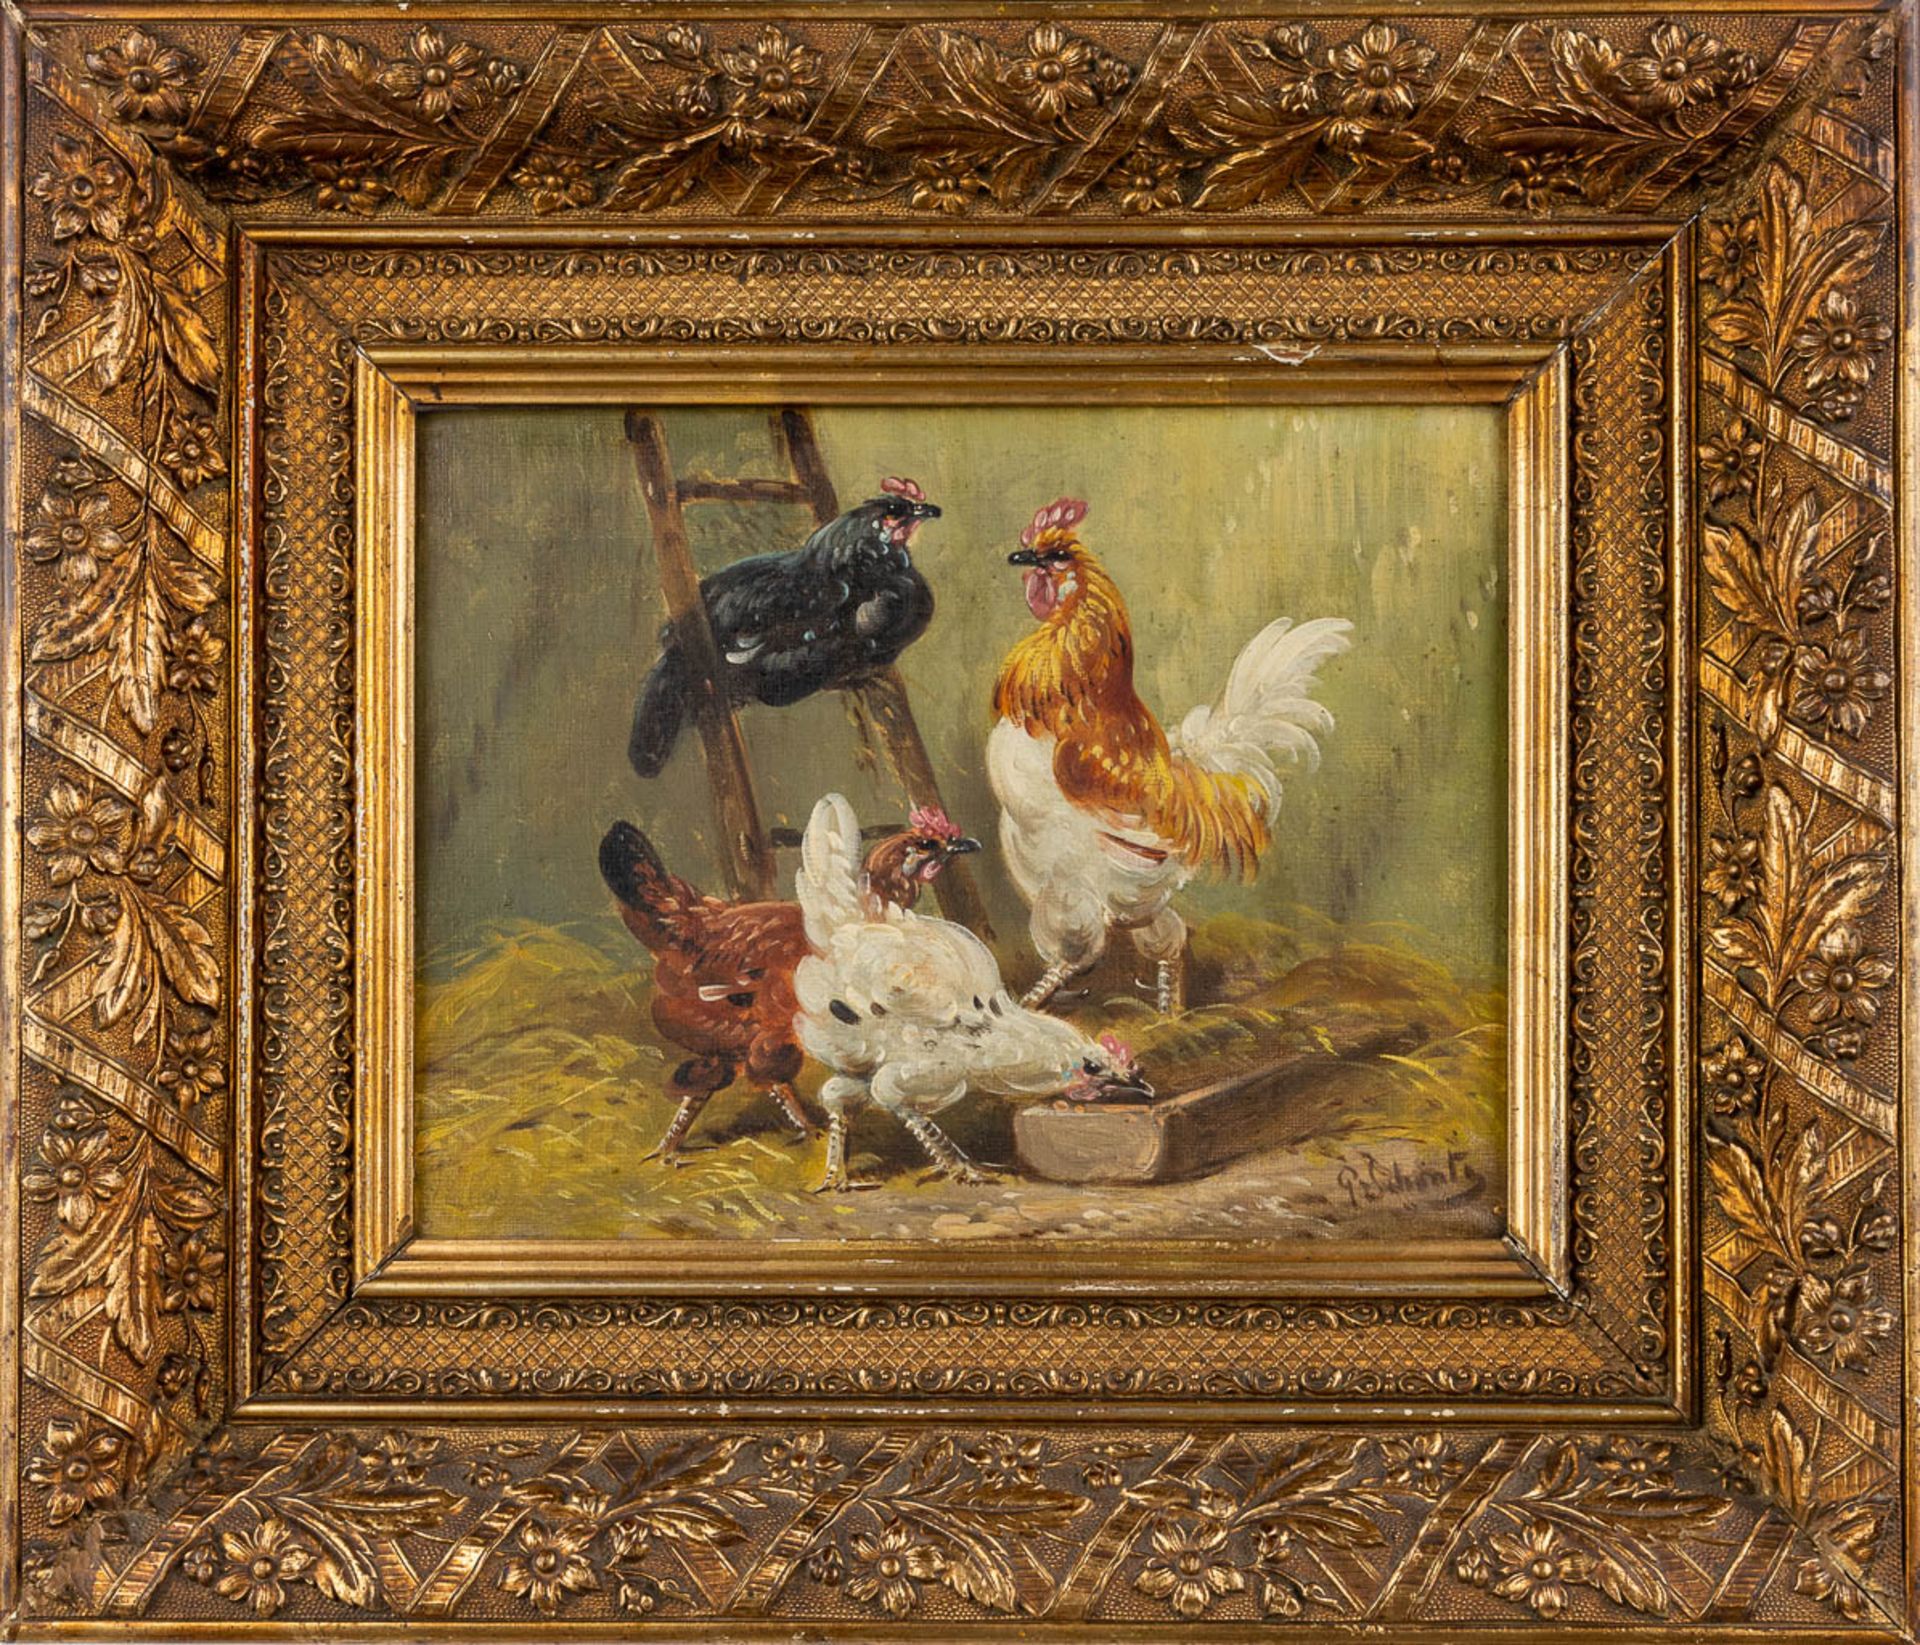 Paul SCHOUTEN (1860-1922) 'Chicken' a pair of pendant paintings, oil on canvas. (W:32,5 x H:24,5 cm) - Image 3 of 9